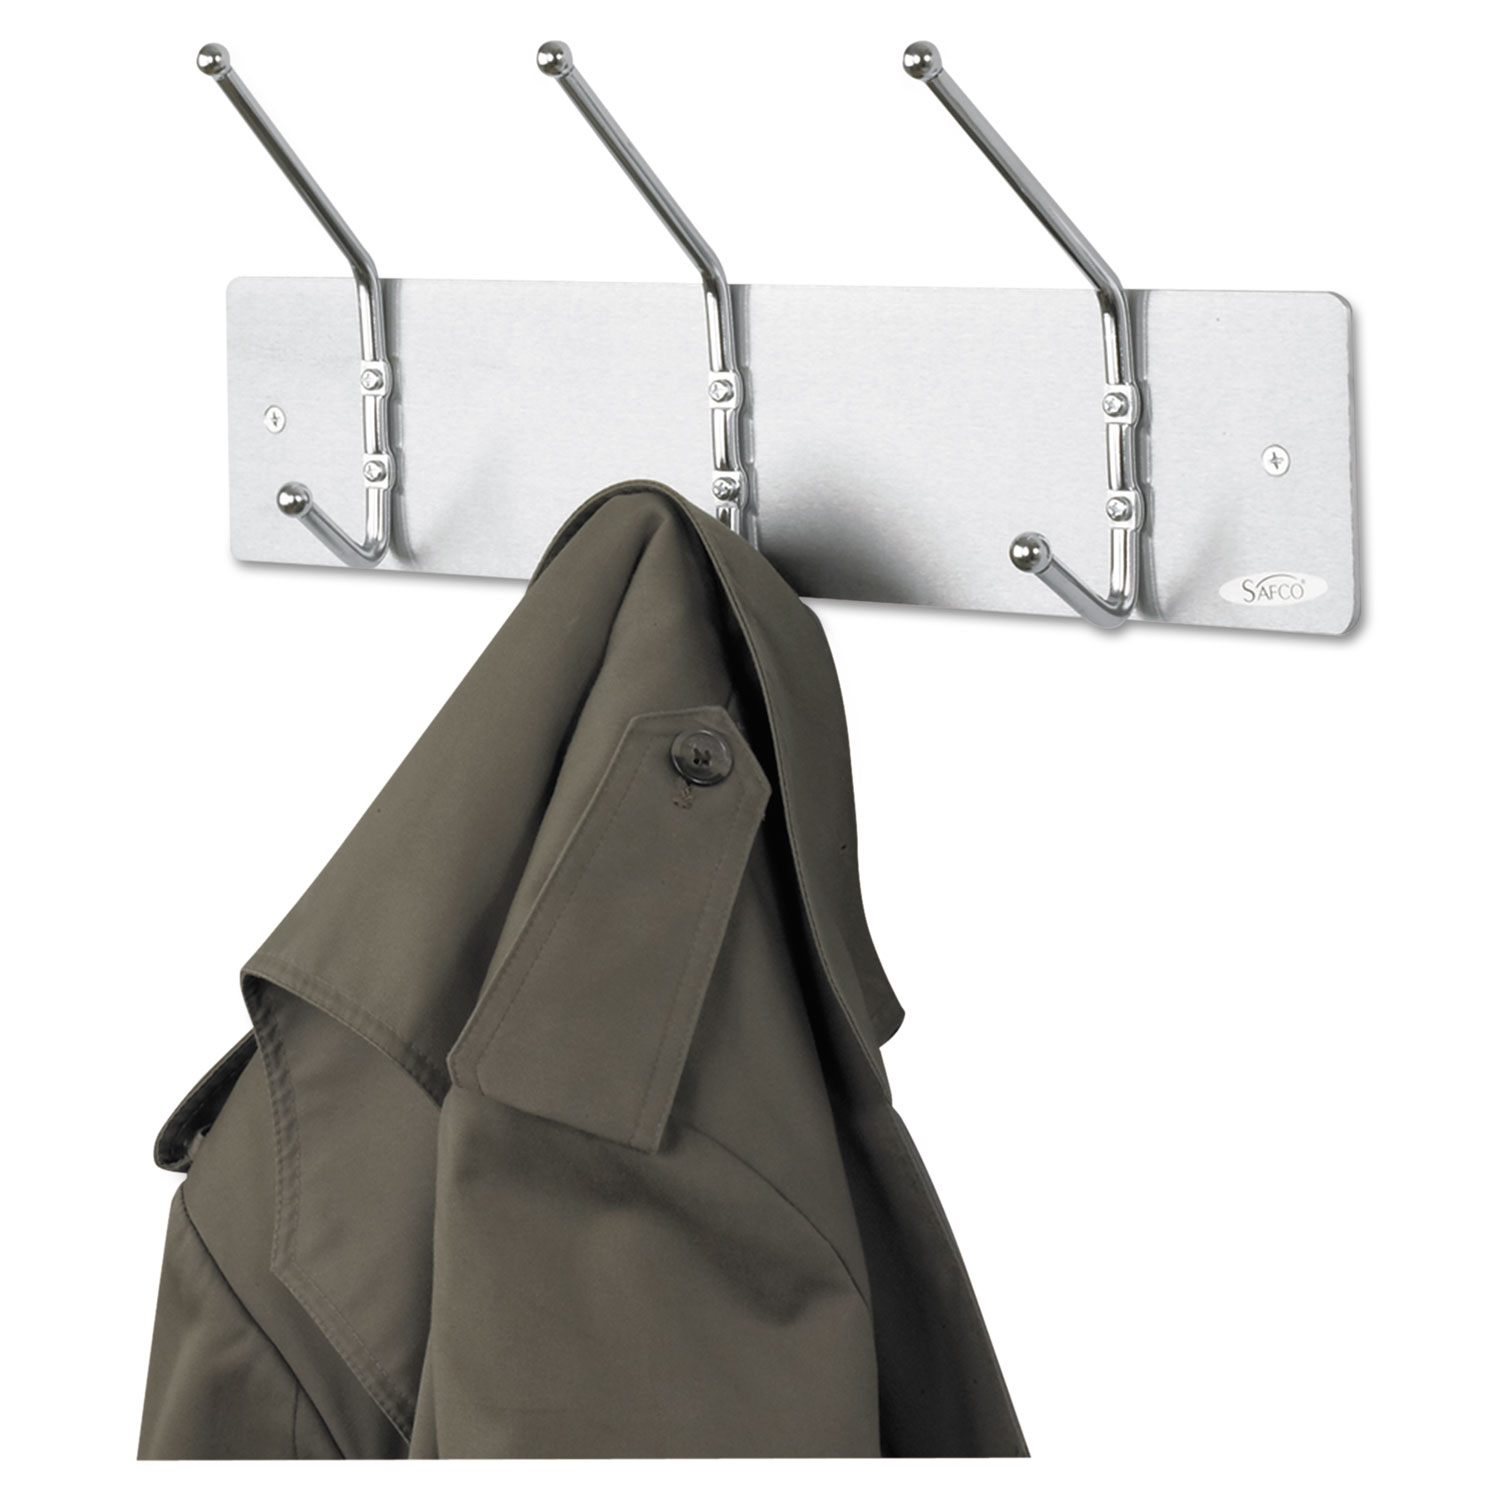  Safco 4161 Metal Wall Rack, Three Ball-Tipped Double-Hooks, 18w x 3.75d x 7h, Satin Metal (SAF4161) 